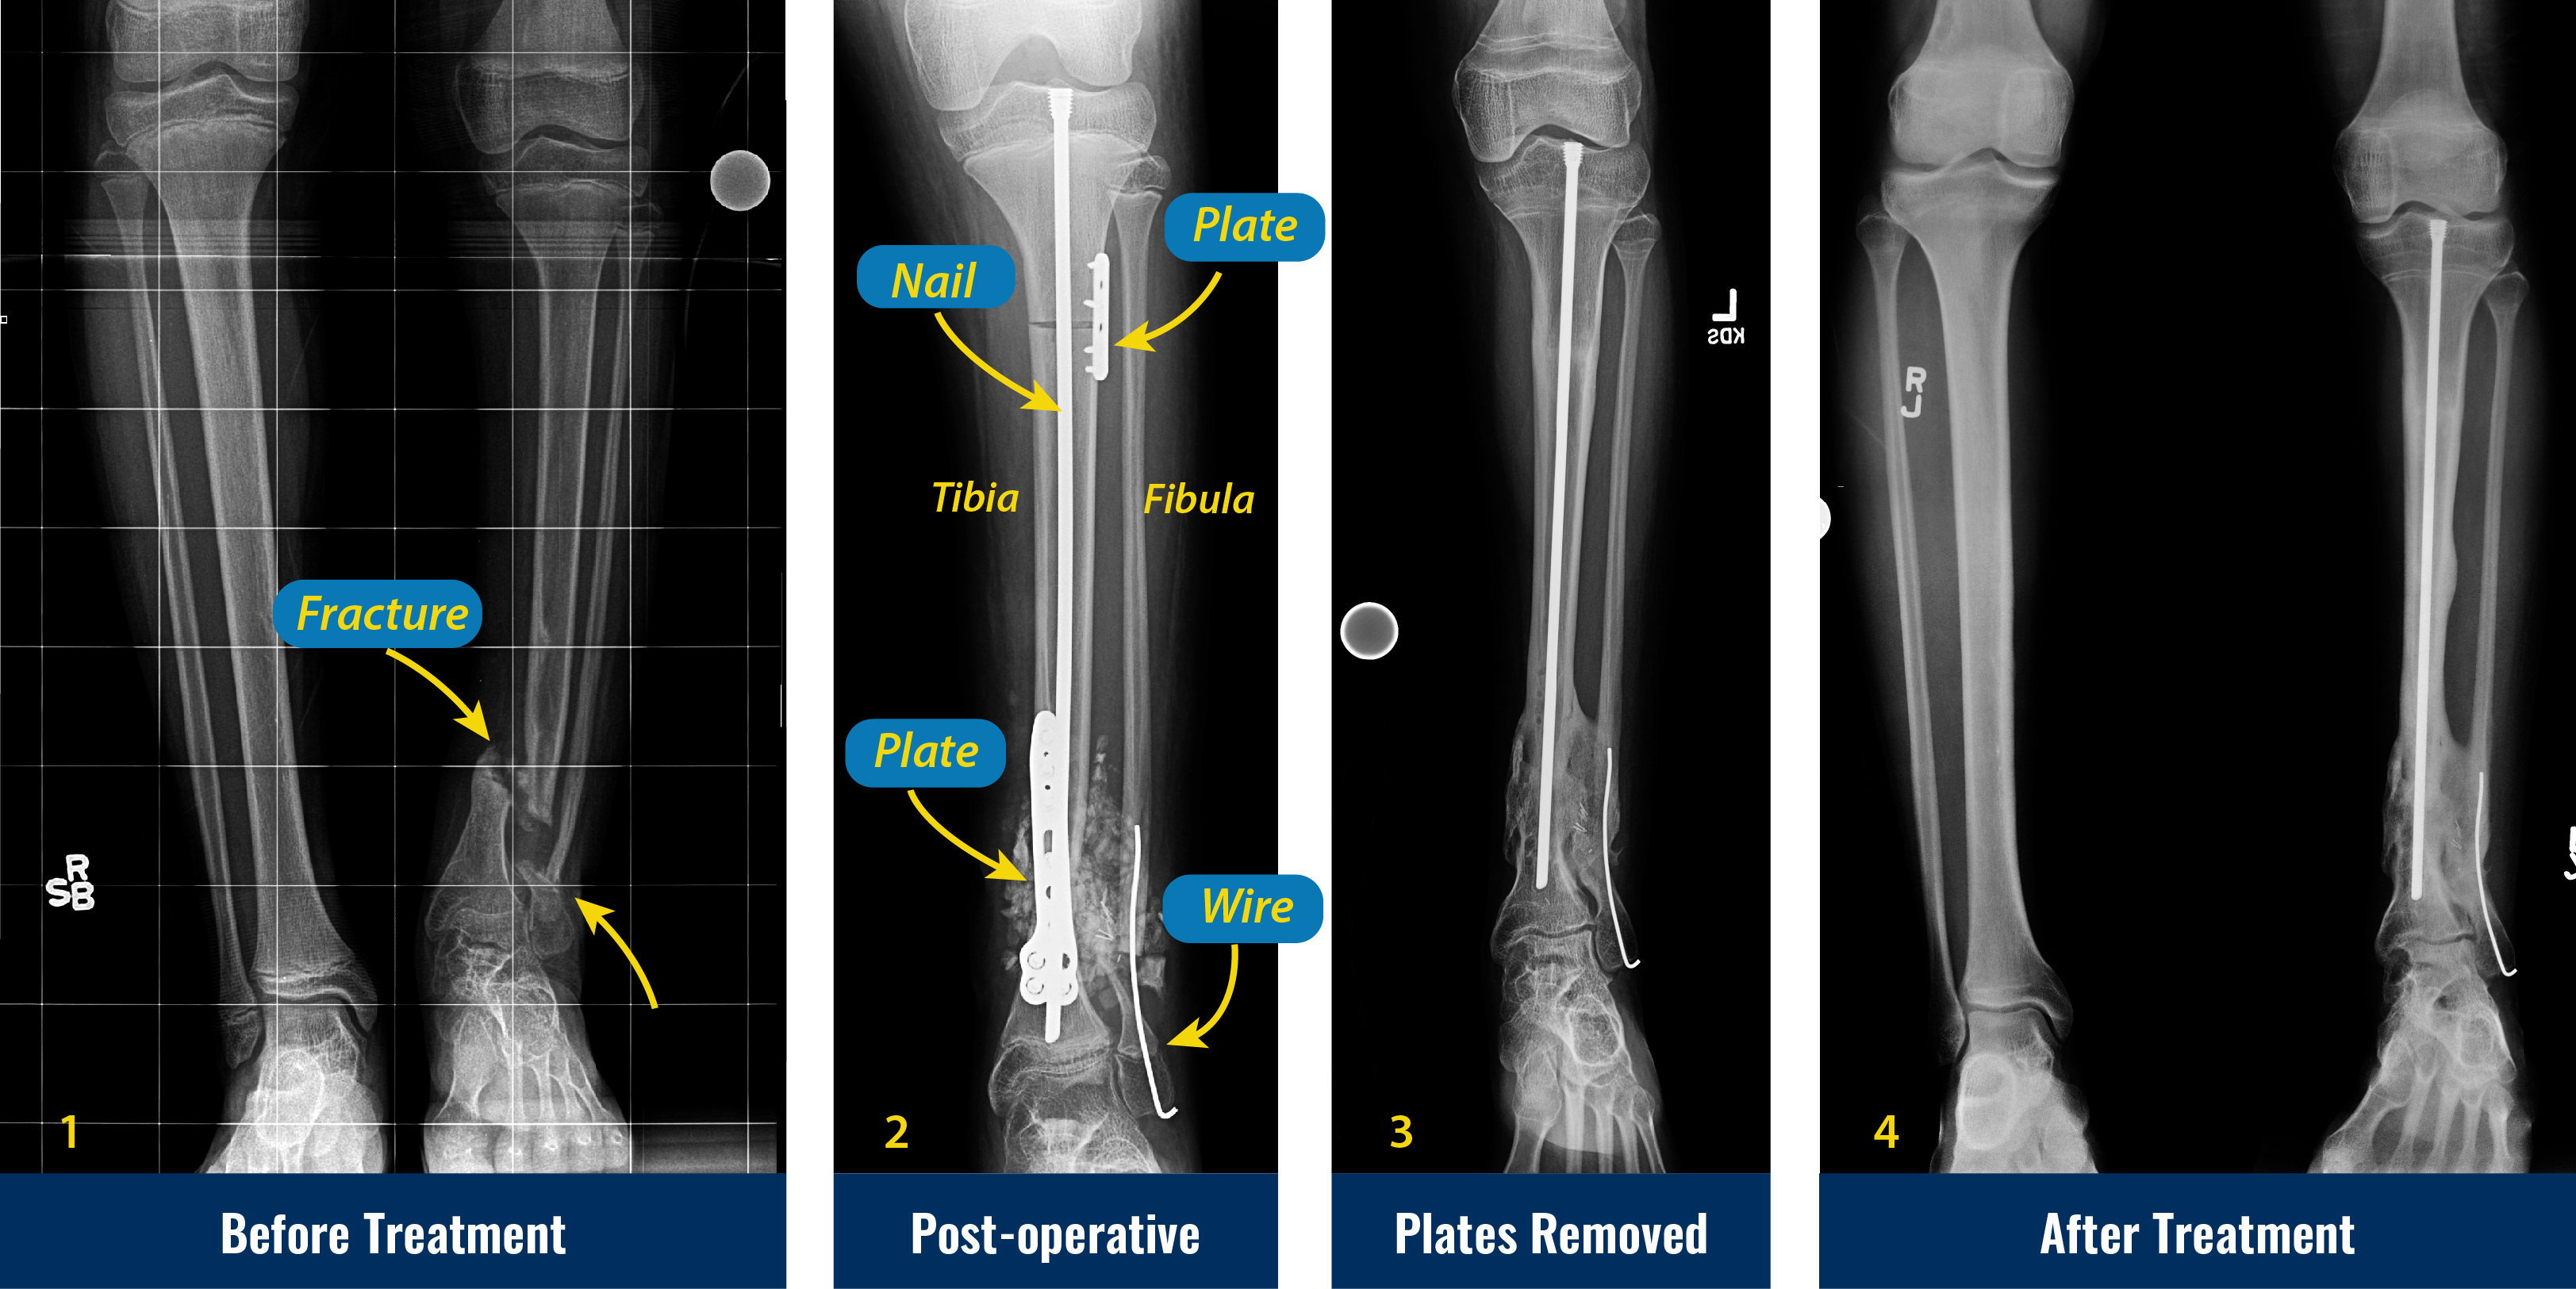 X-rays of congenital pseudarthrosis of the tibia before cross-union treatment, after surgery, after plate removal, and after treatment